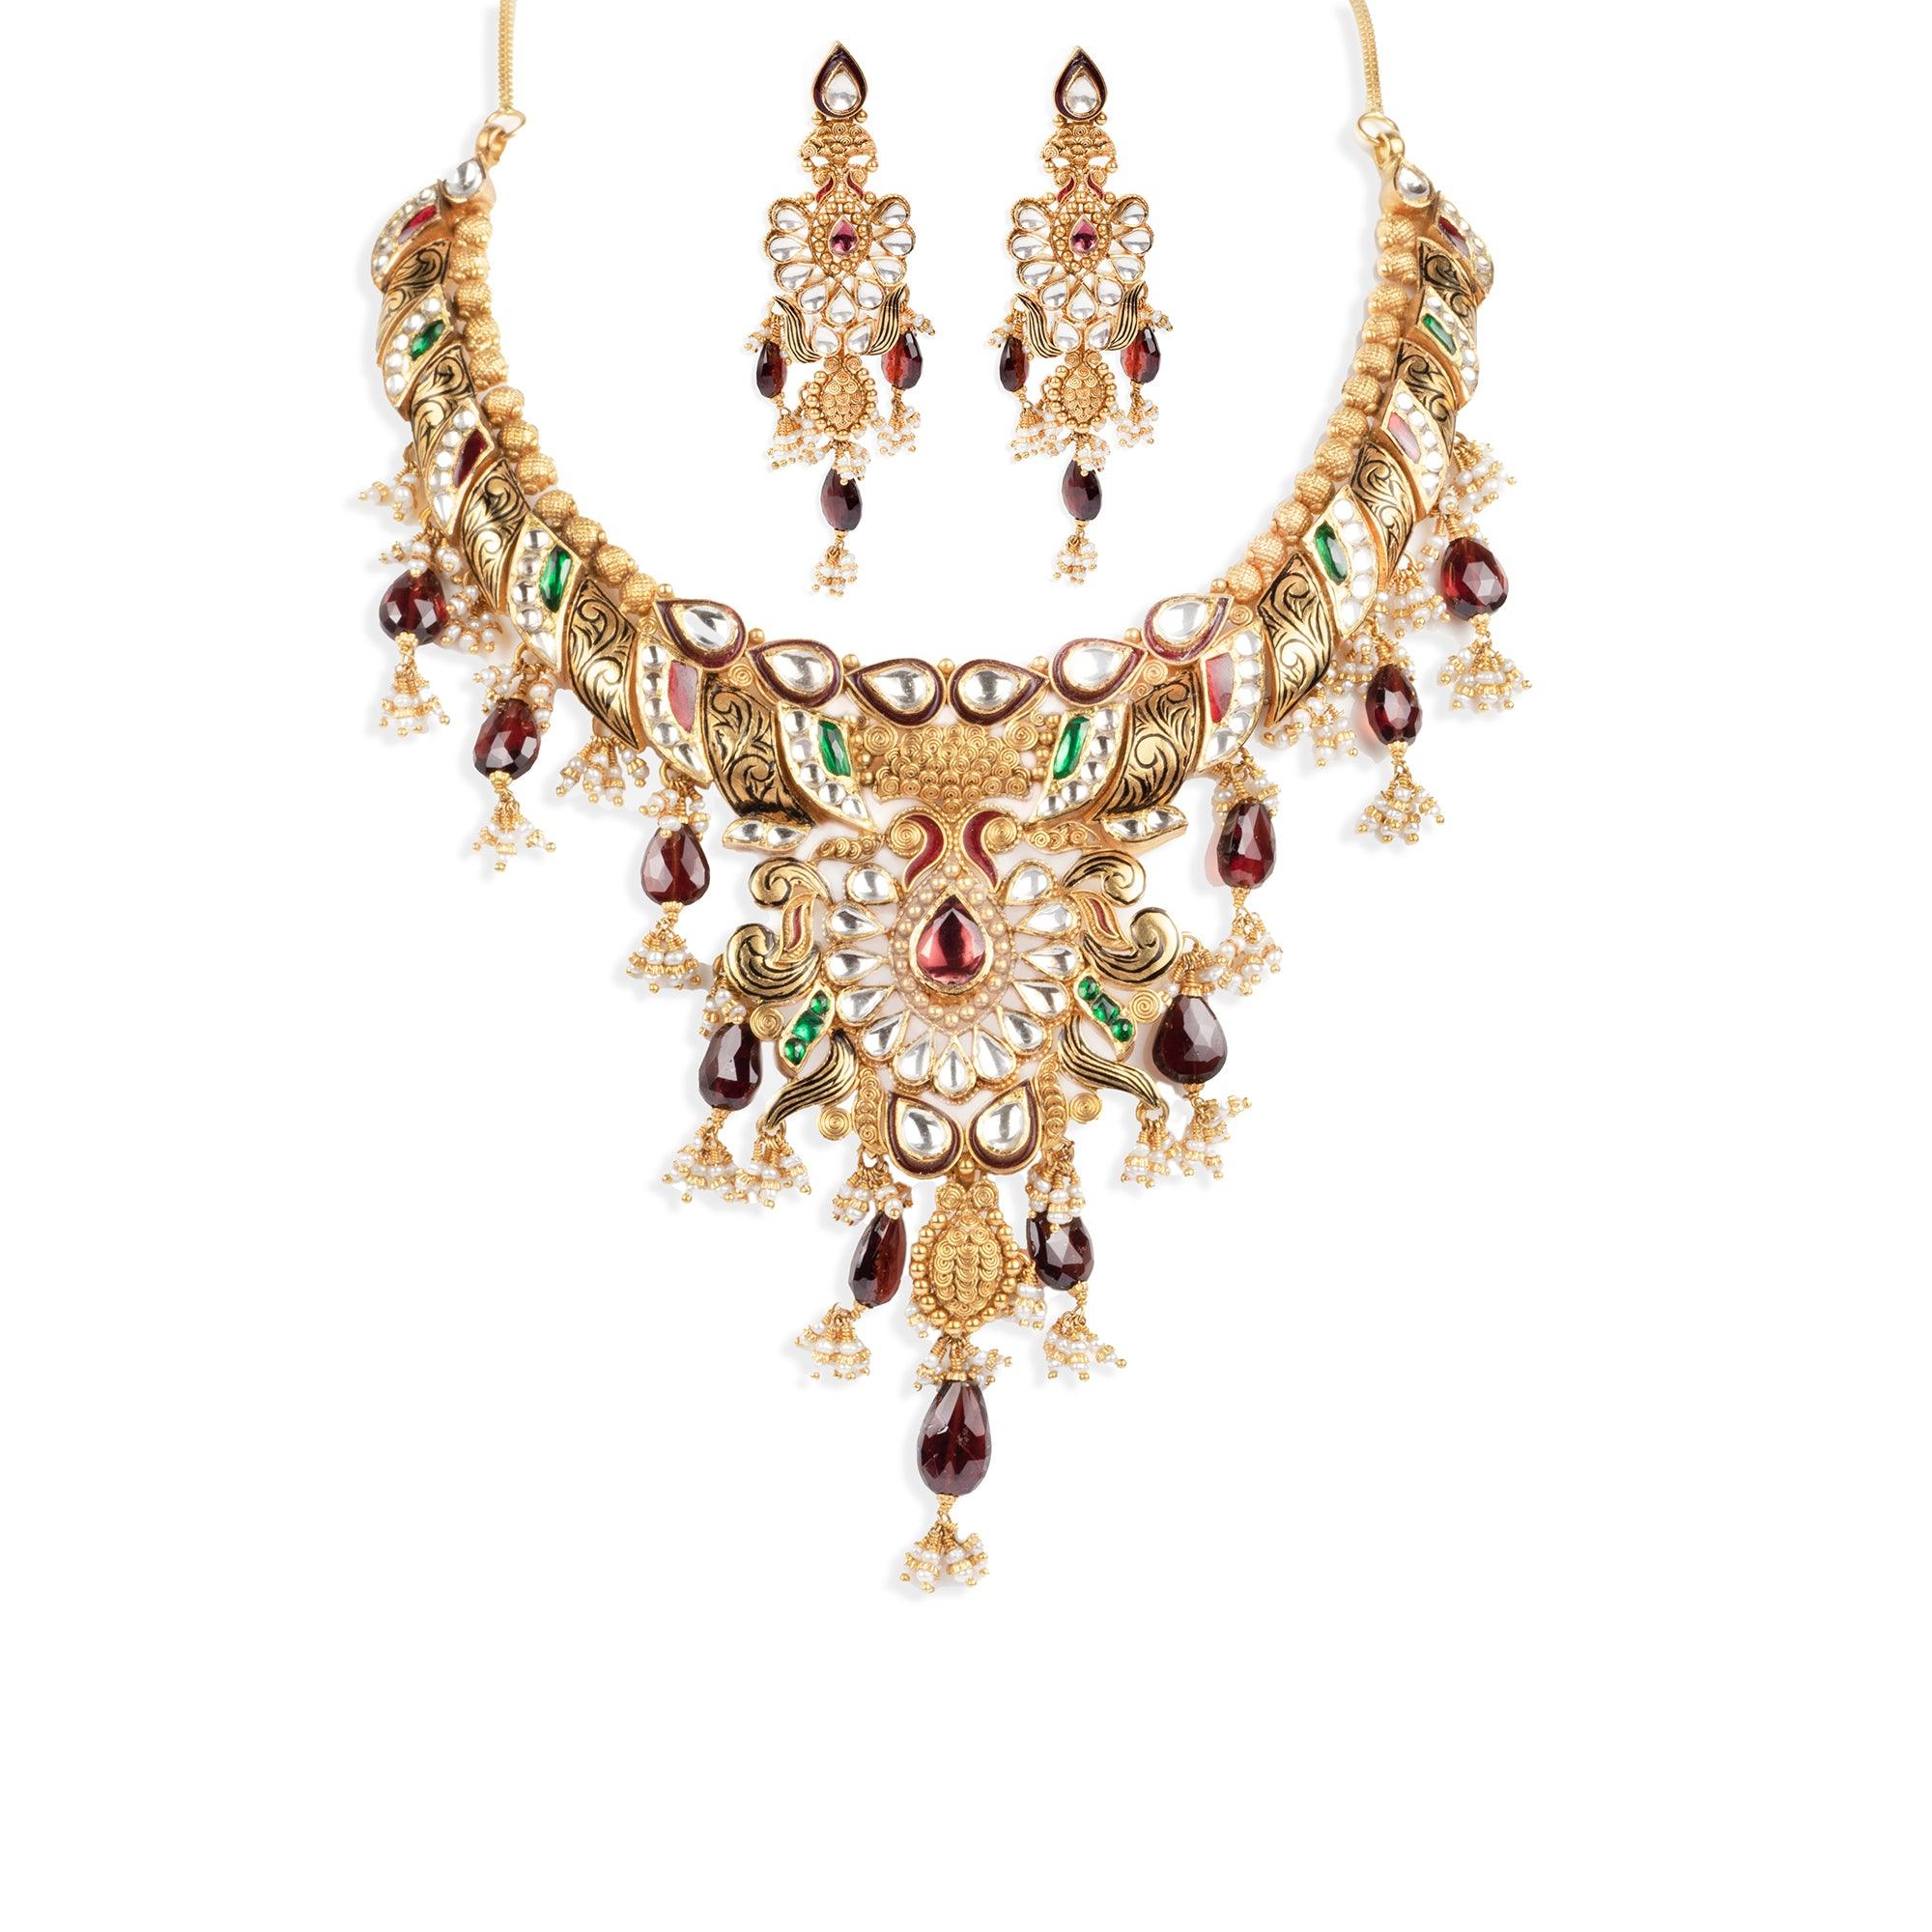 22ct Gold Antiquated Look Necklace and Earrings set with Cubic Zirconia & Coloured Stones Earrings (130.8g) N&E-5203